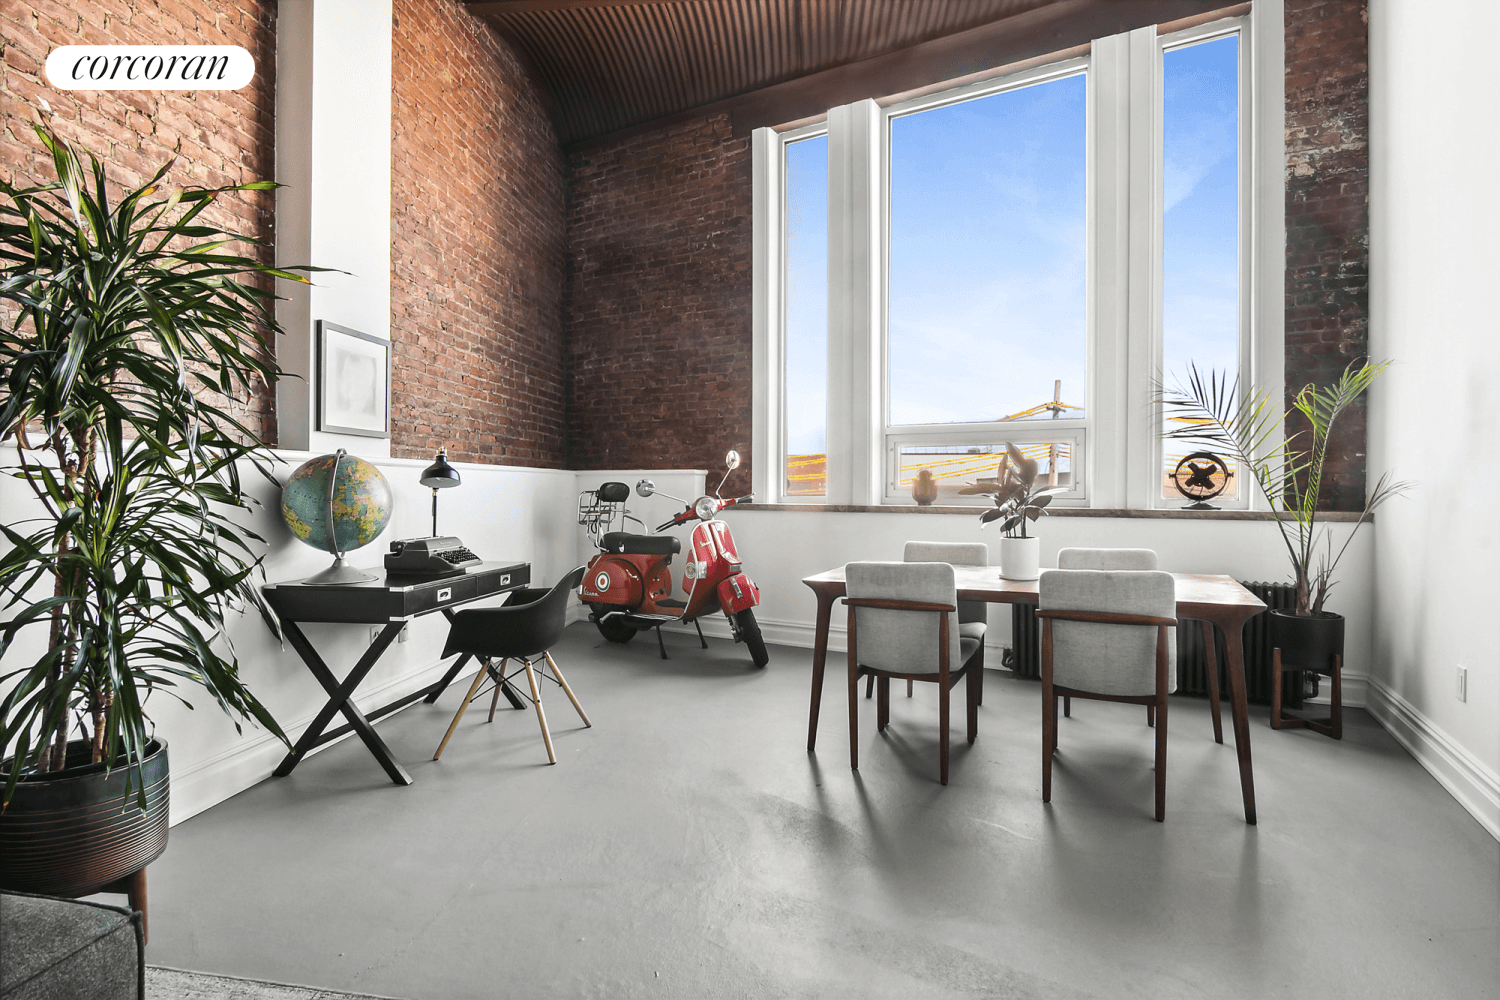 Presenting The Williamsburg Firehouse Lofts, a condo conversion like you've never seen before.